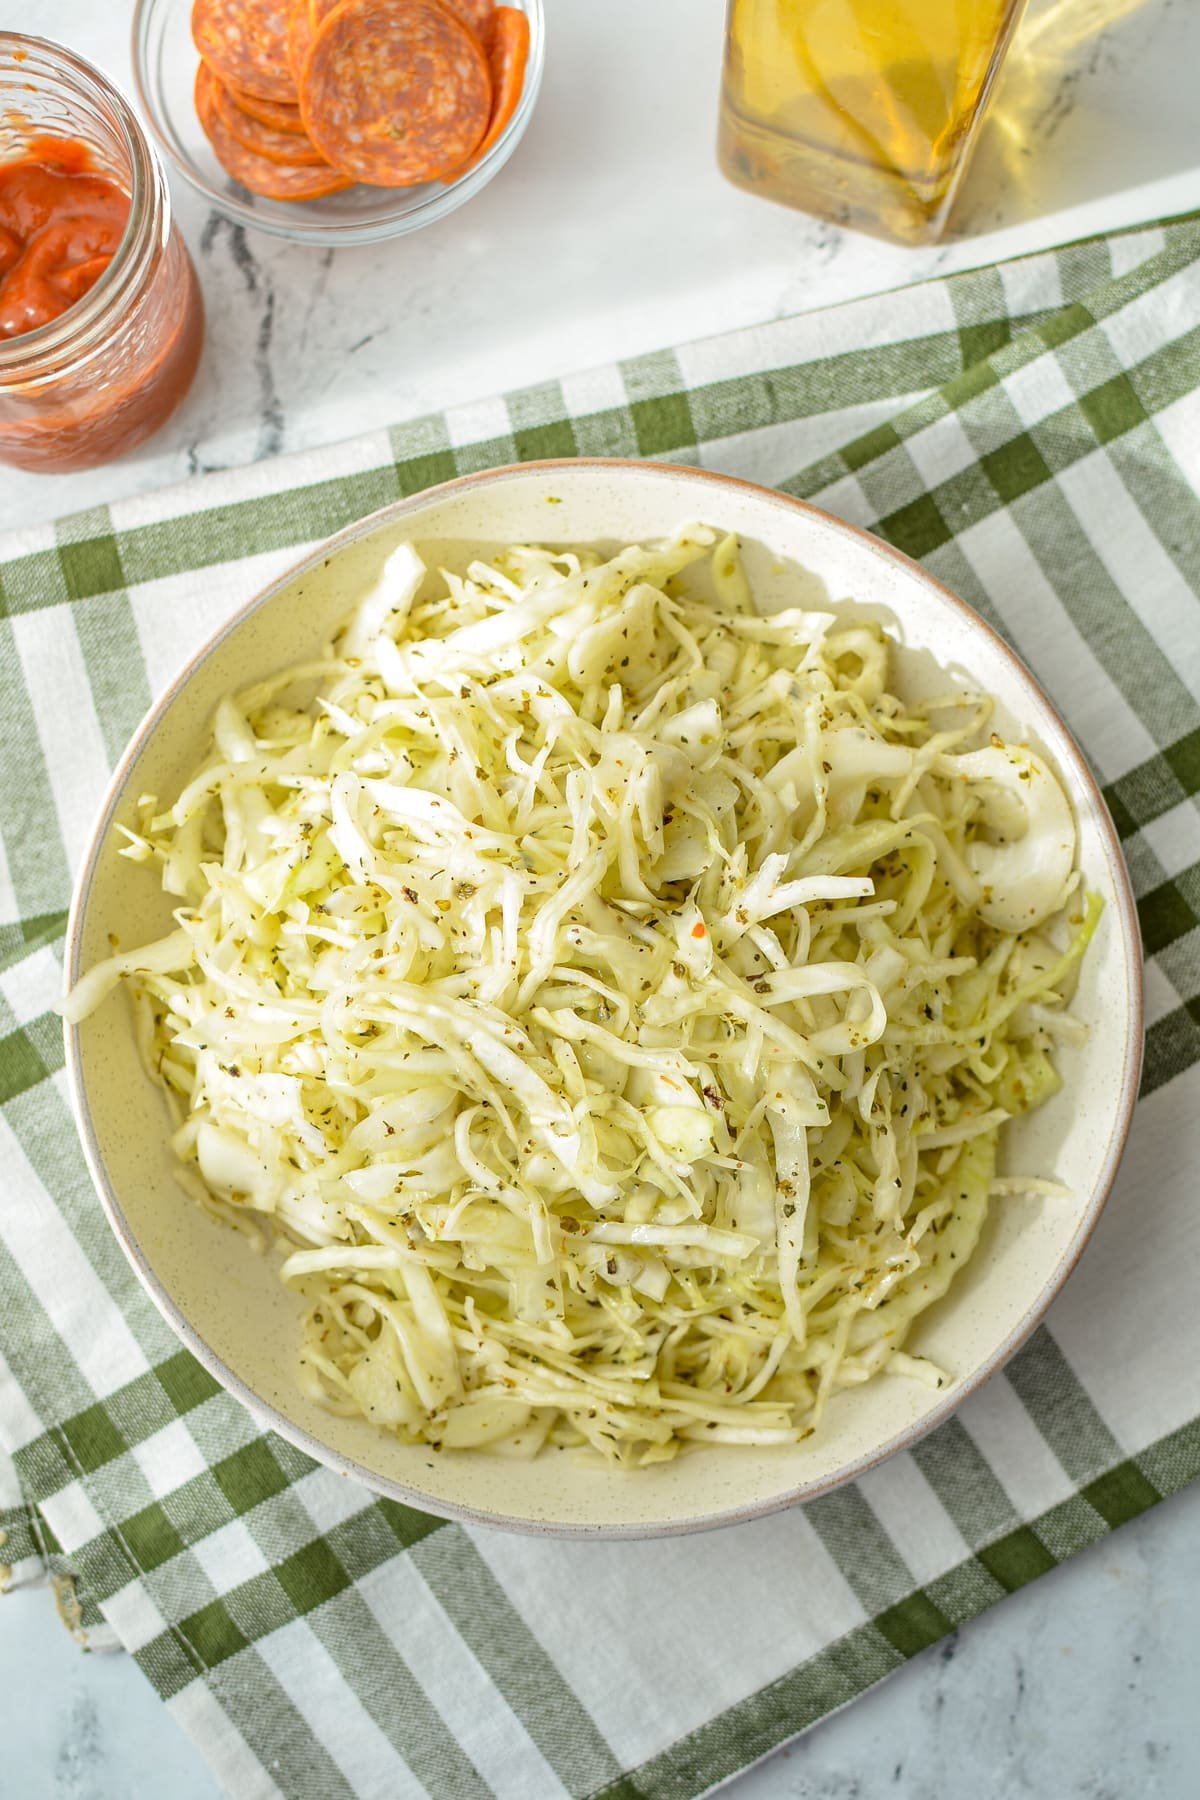 A bowl of shredded cabbage topped with an oil and vinegar dressing.